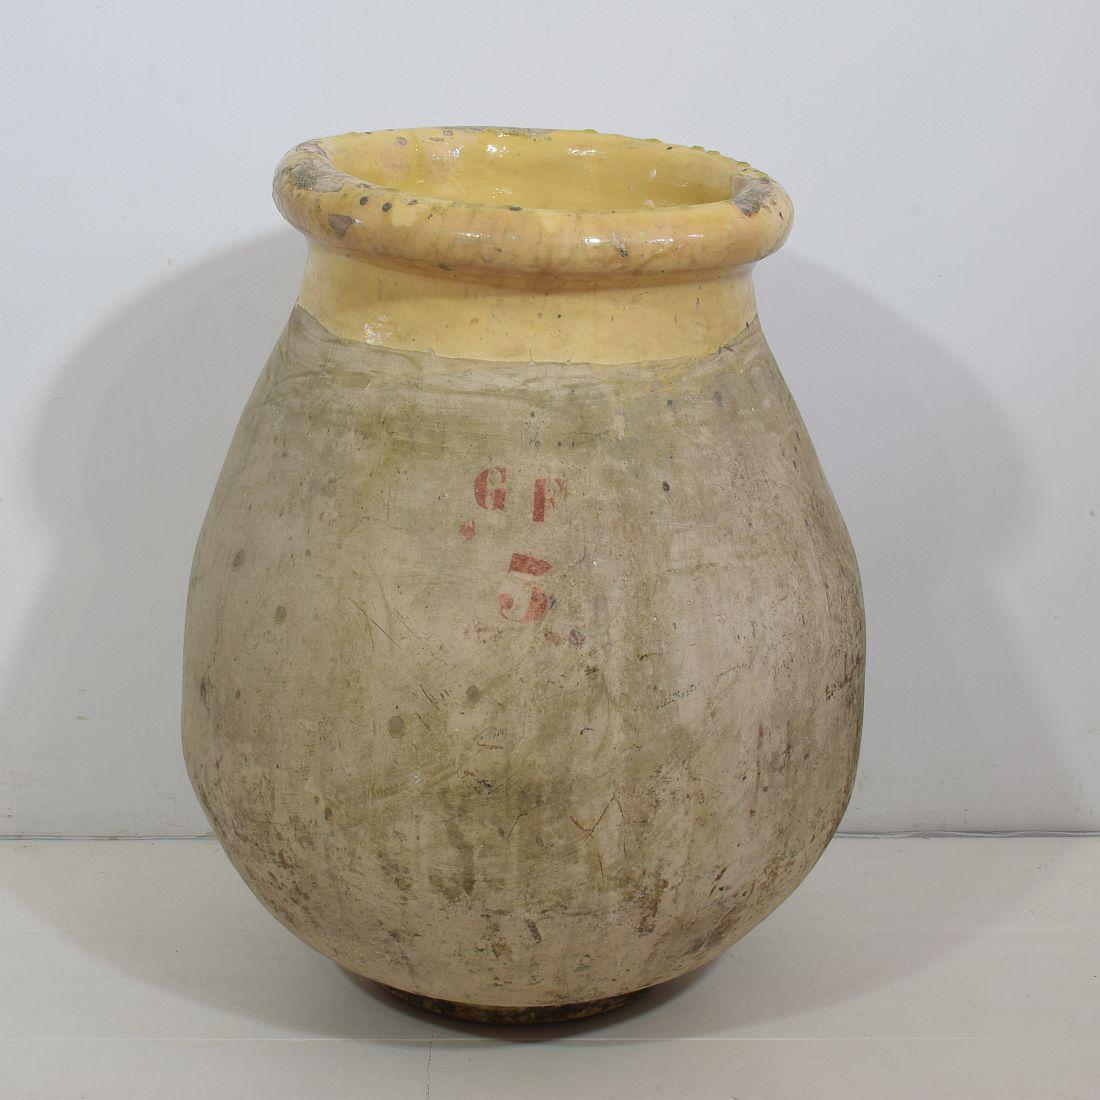 French Biot jar dating to the mid-late 19th century. Rounded shapely body with a rolled-edge yellow-glazed lip.
France, circa 1850-1900.
Weathered.